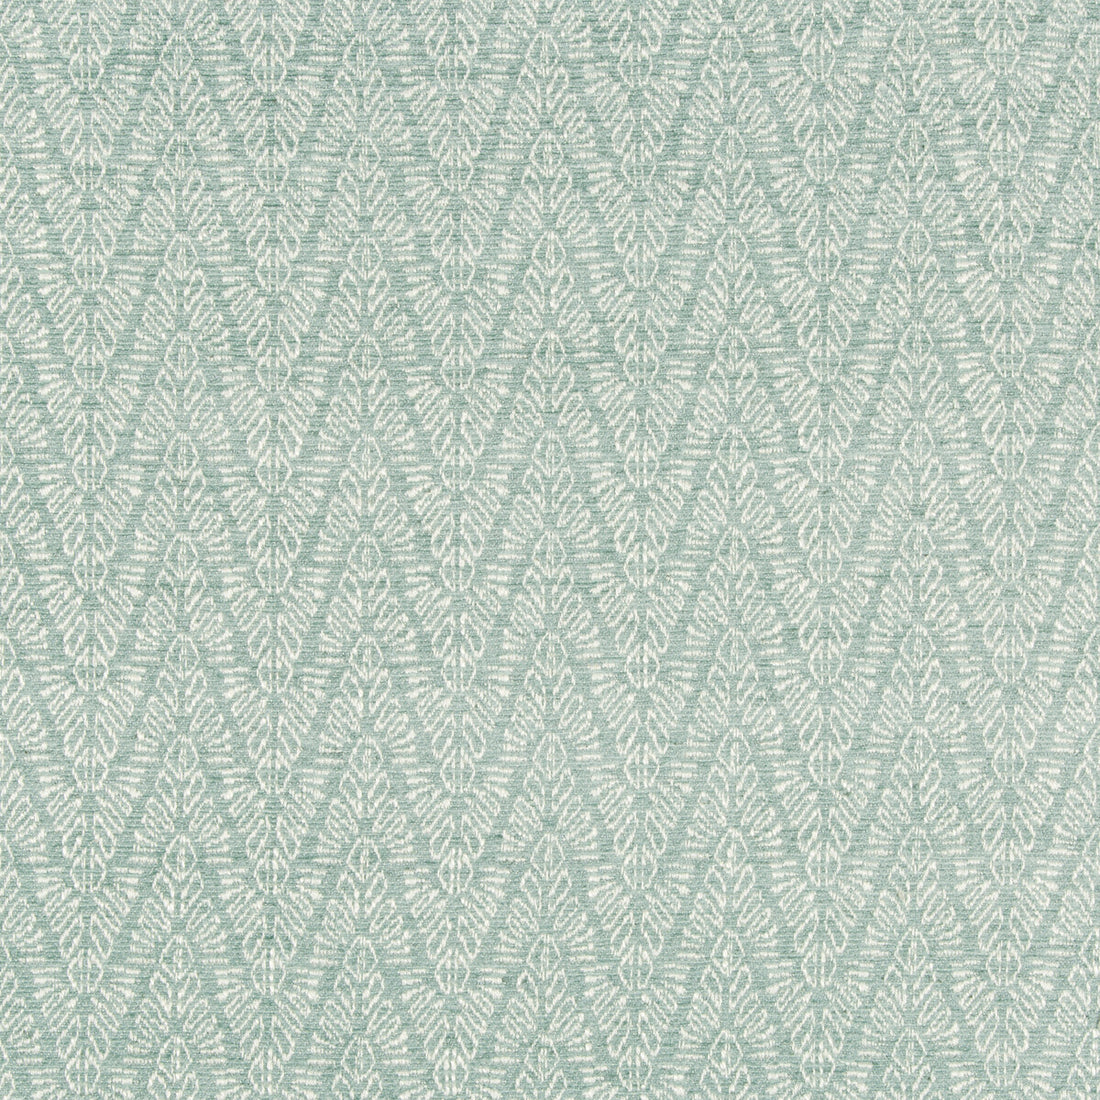 Topaz Weave fabric in aqua color - pattern GWF-3750.13.0 - by Lee Jofa Modern in the Gems collection